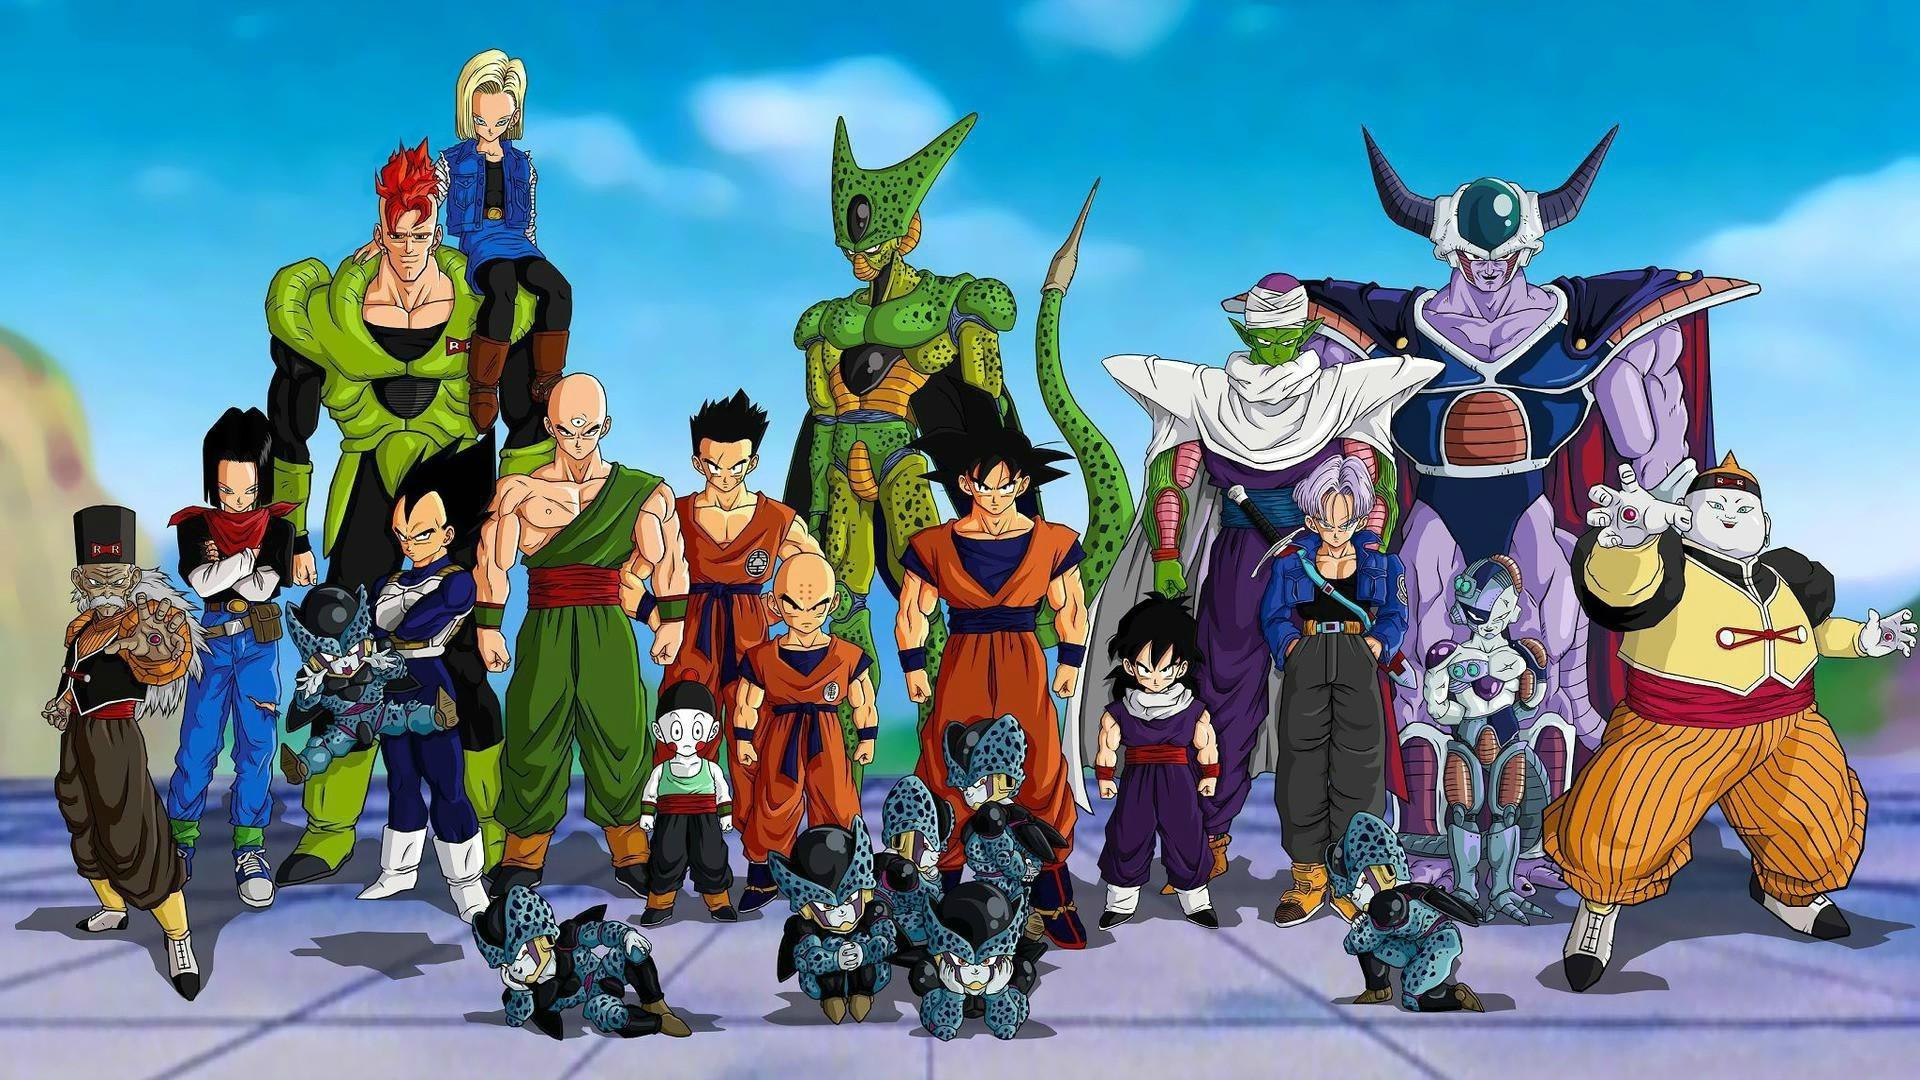 Dragon Ball, Cell (character), Trunks (character), Vegeta, Gohan, Krillin, Android Android Tien Shinhan, Dr. Gero, Android Piccolo, Mecha Frieza, Chiaotzu Wallpaper HD / Desktop and Mobile Background